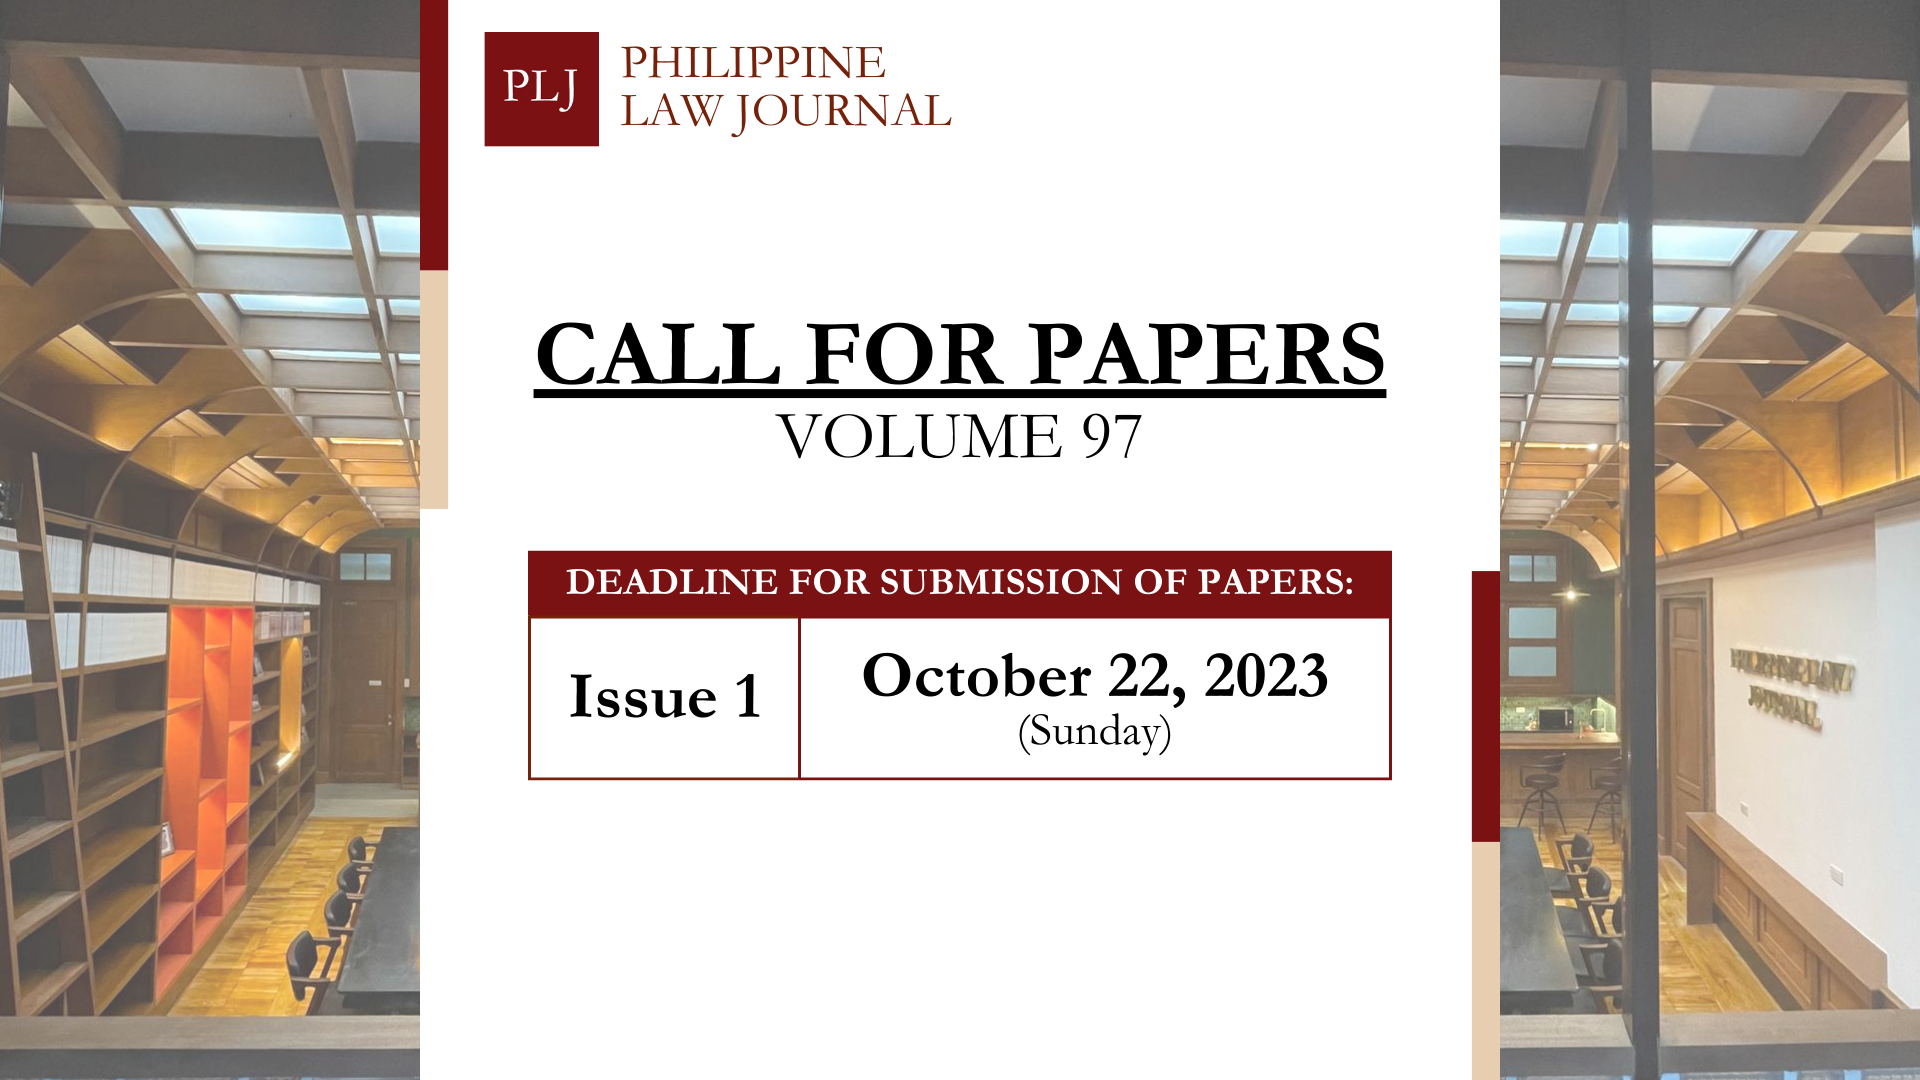 Philippine Law Journal Volume 97 Call for Papers